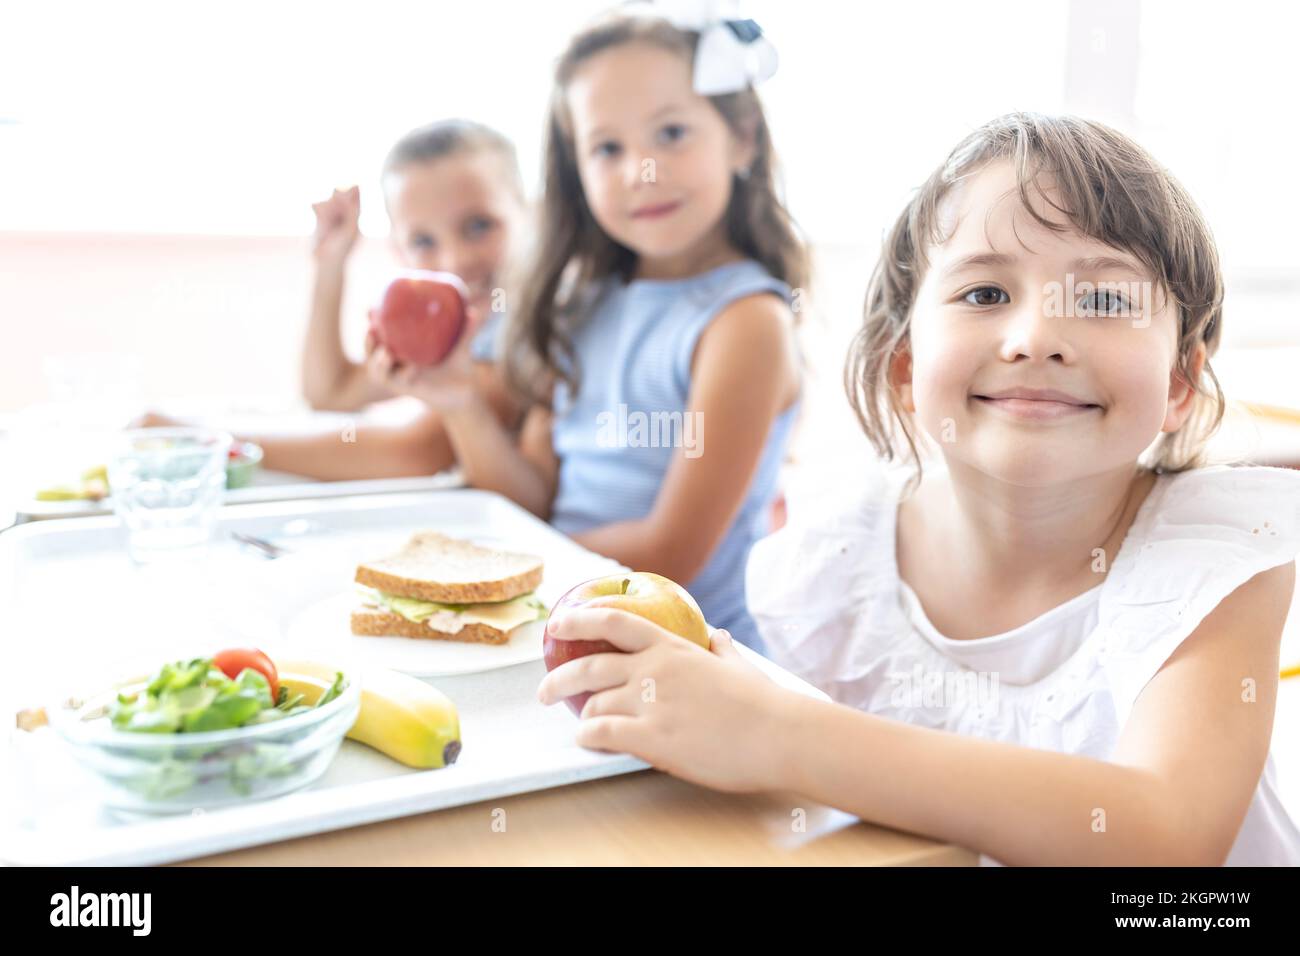 https://c8.alamy.com/comp/2KGPW1W/smiling-elementary-student-with-food-tray-on-table-at-lunch-break-in-cafeteria-2KGPW1W.jpg